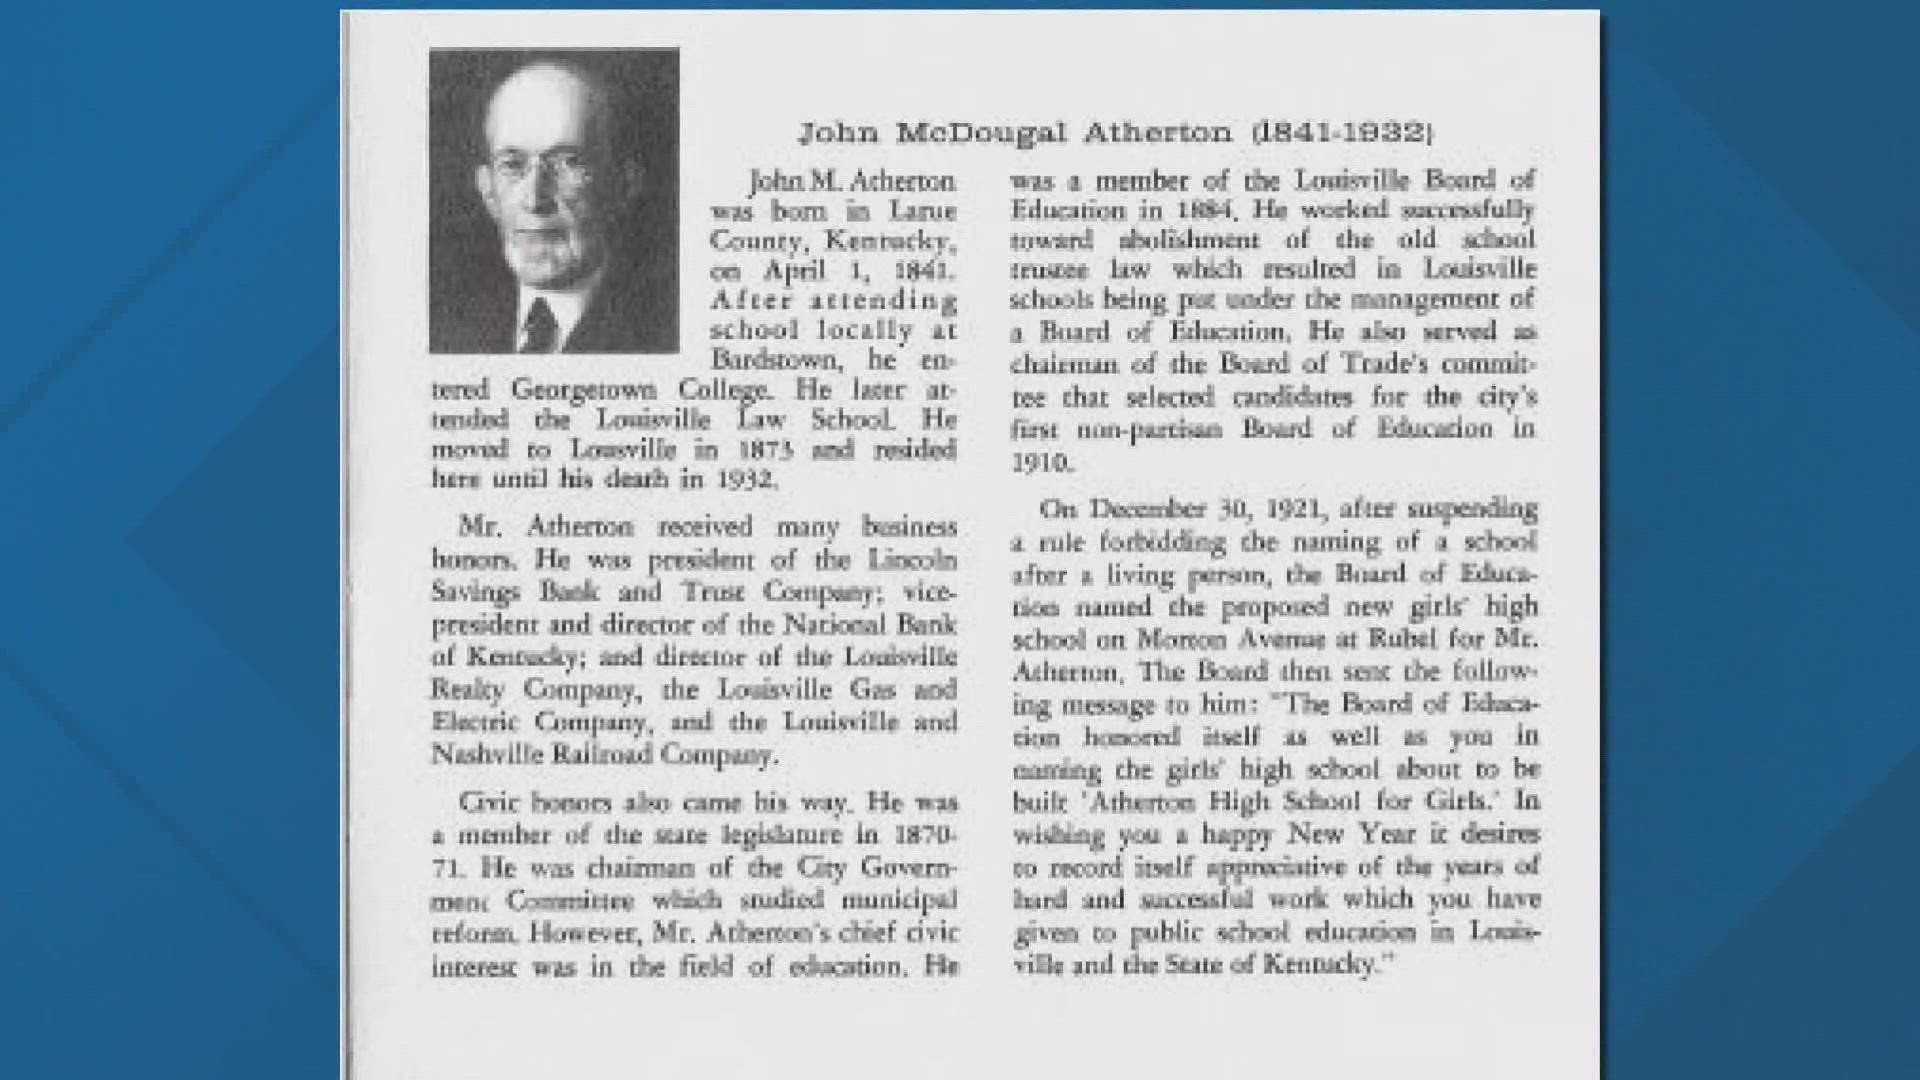 John McDougall Atherton studied law in college; he was an entrepreneur who specialized in real estate where he owned several downtown properties and bourbon.